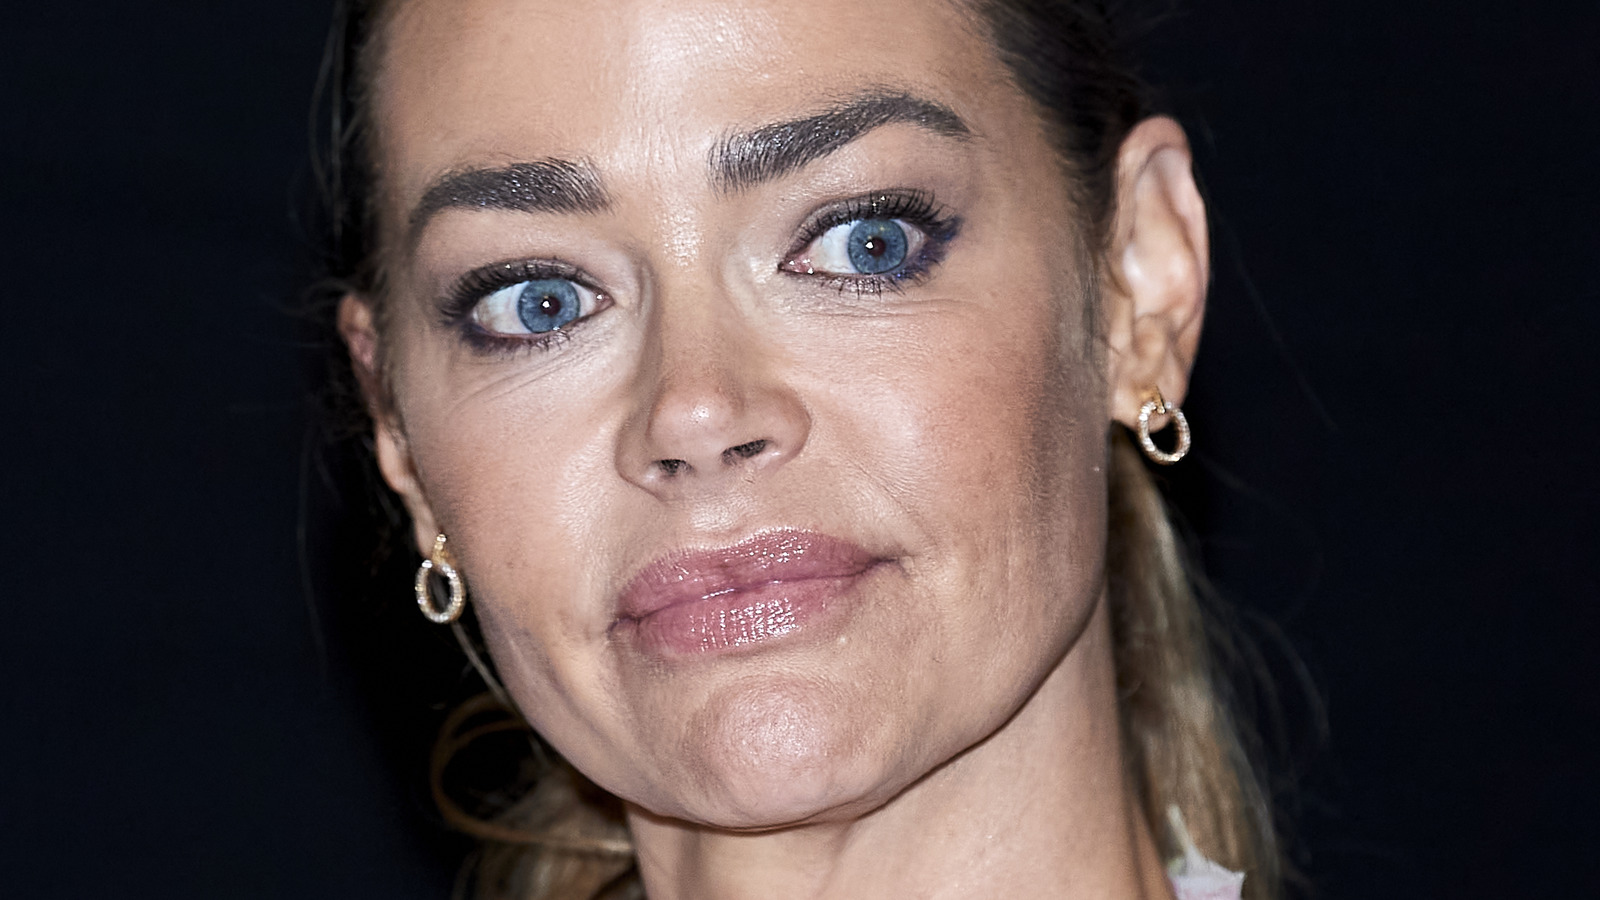 What We Know About Denise Richards’ Disturbing Road Rage Encounter